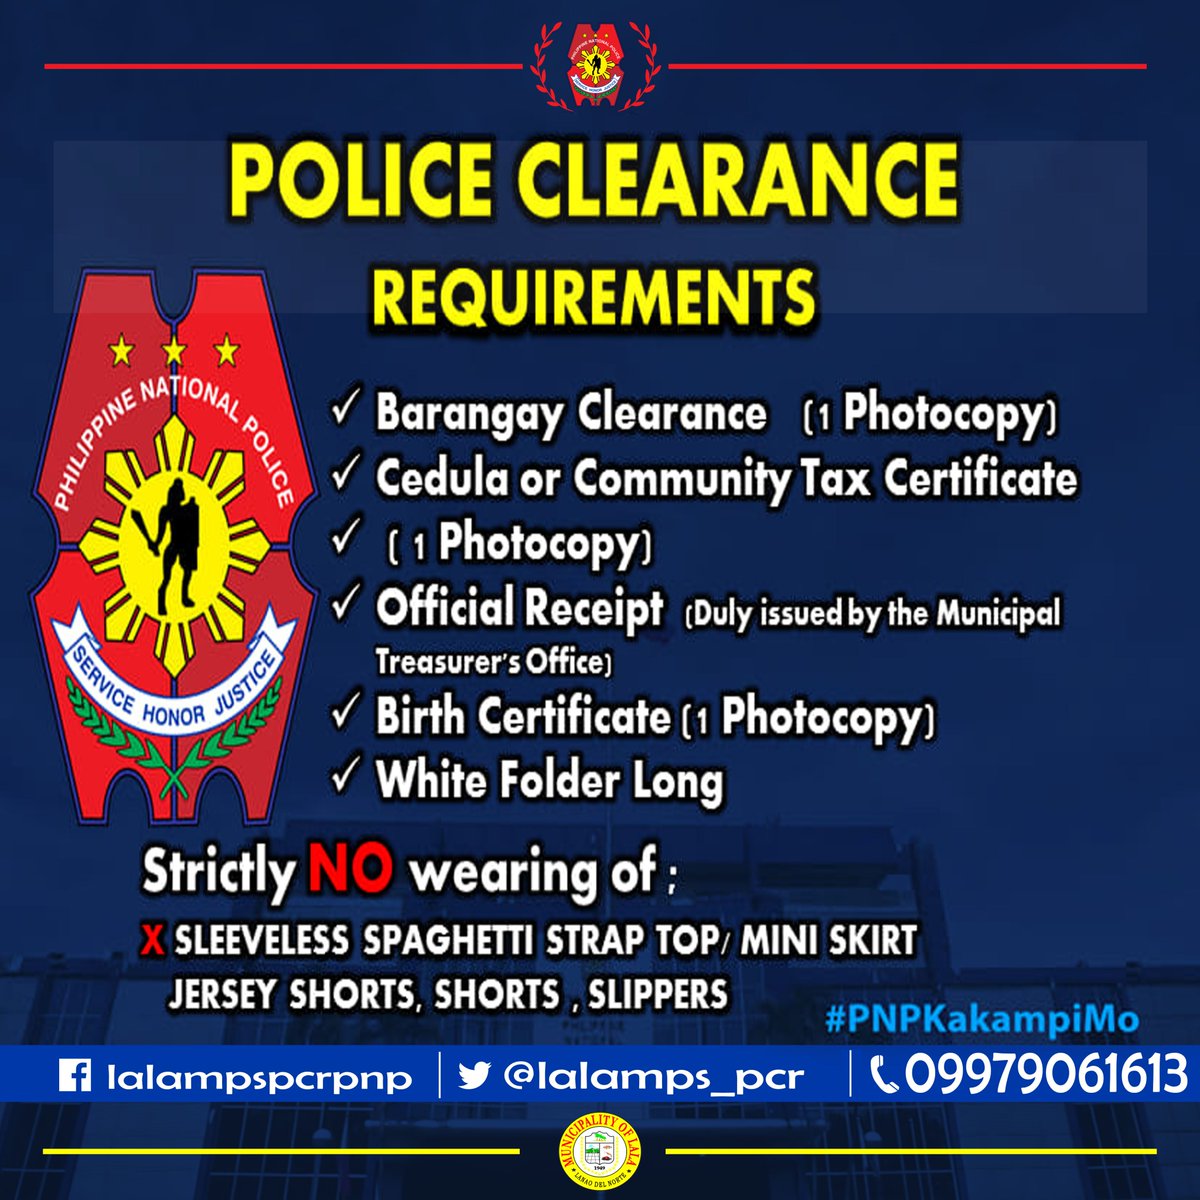 National Police Clearance Requirements 